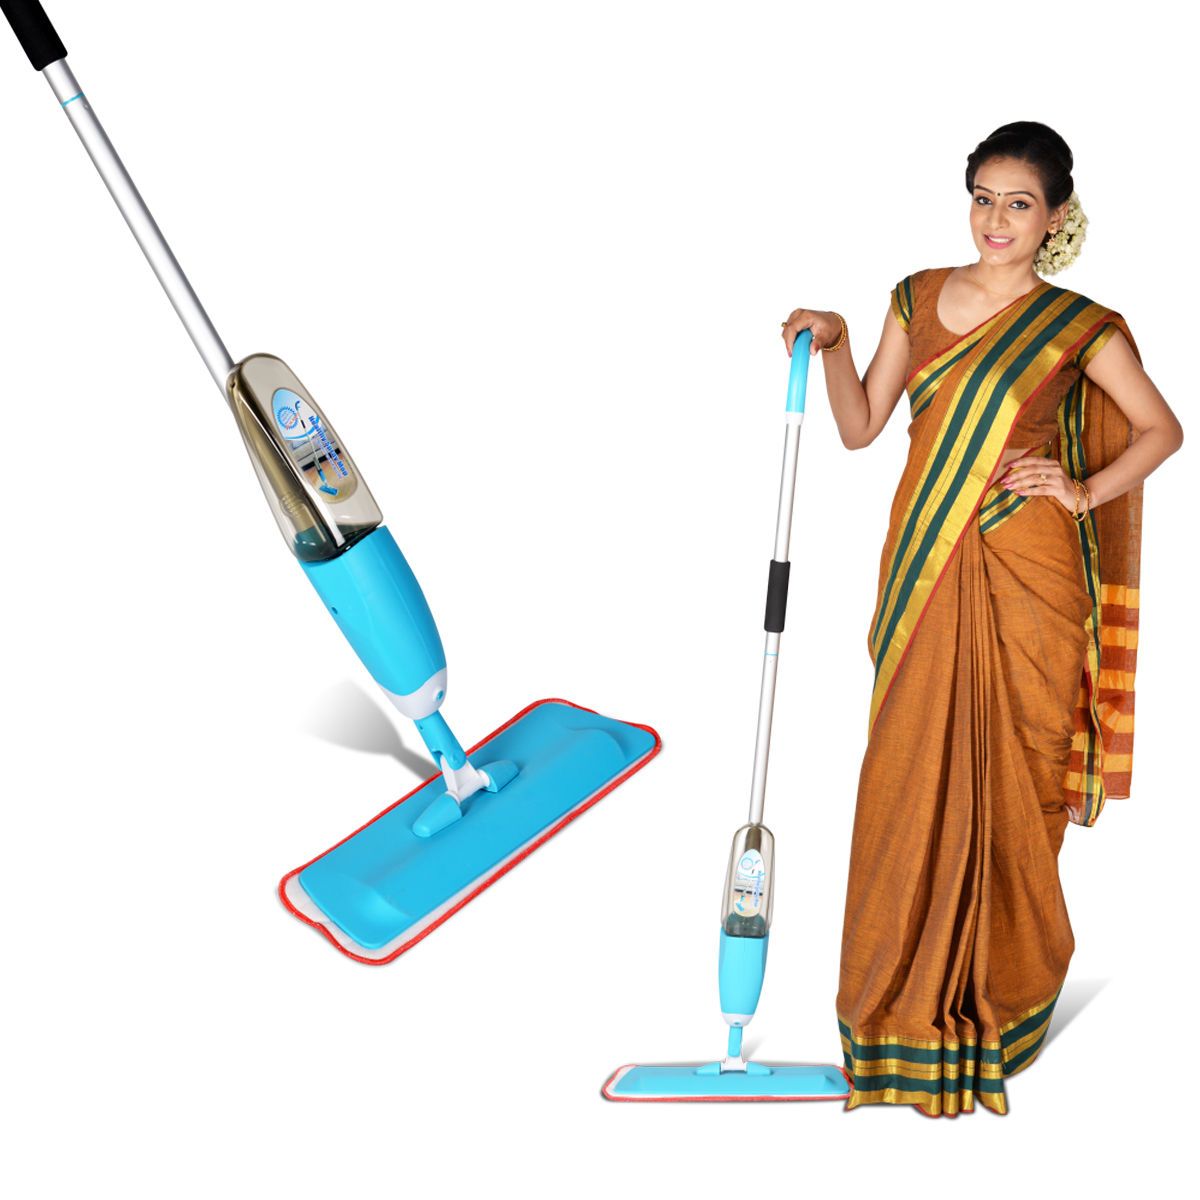 Magic Spray Mop (Made for Smart Indians) - Local to Vocal